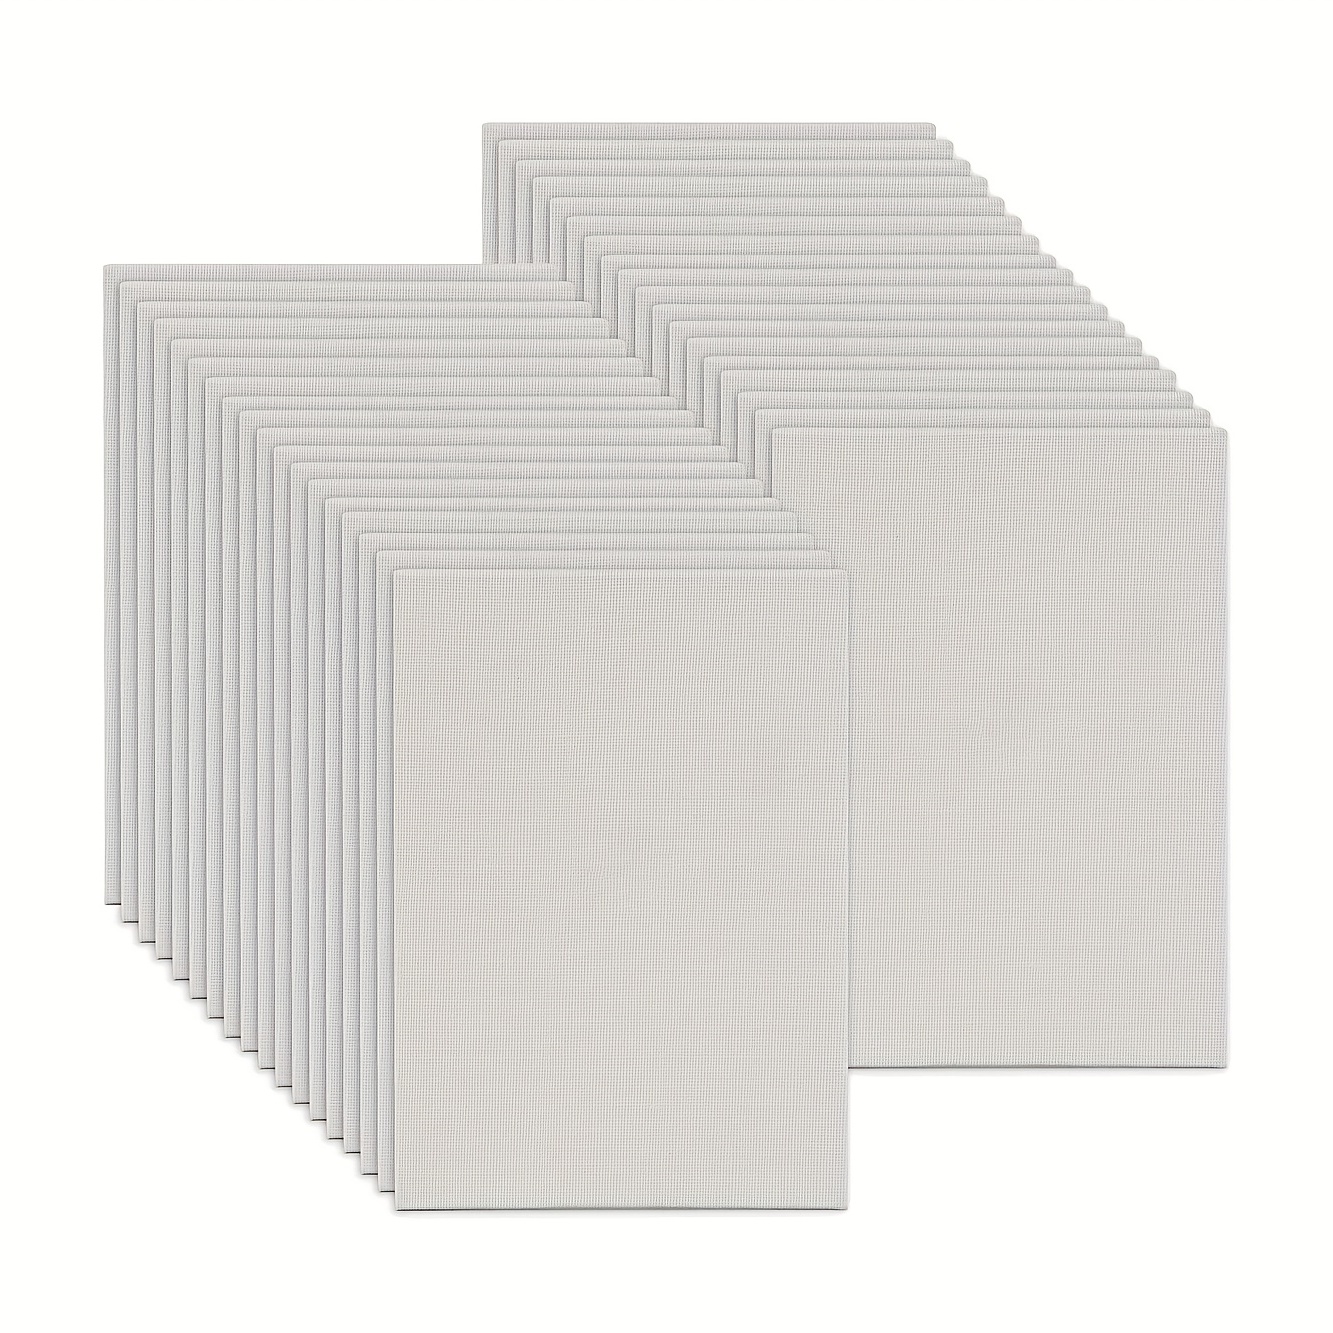 Hexagon Stretched Blank Canvas for Painting White Canvas Boards with Frame  Set of 6 (12/10/8in )Canvases, Painting Supplies Art Board Paint Canvas